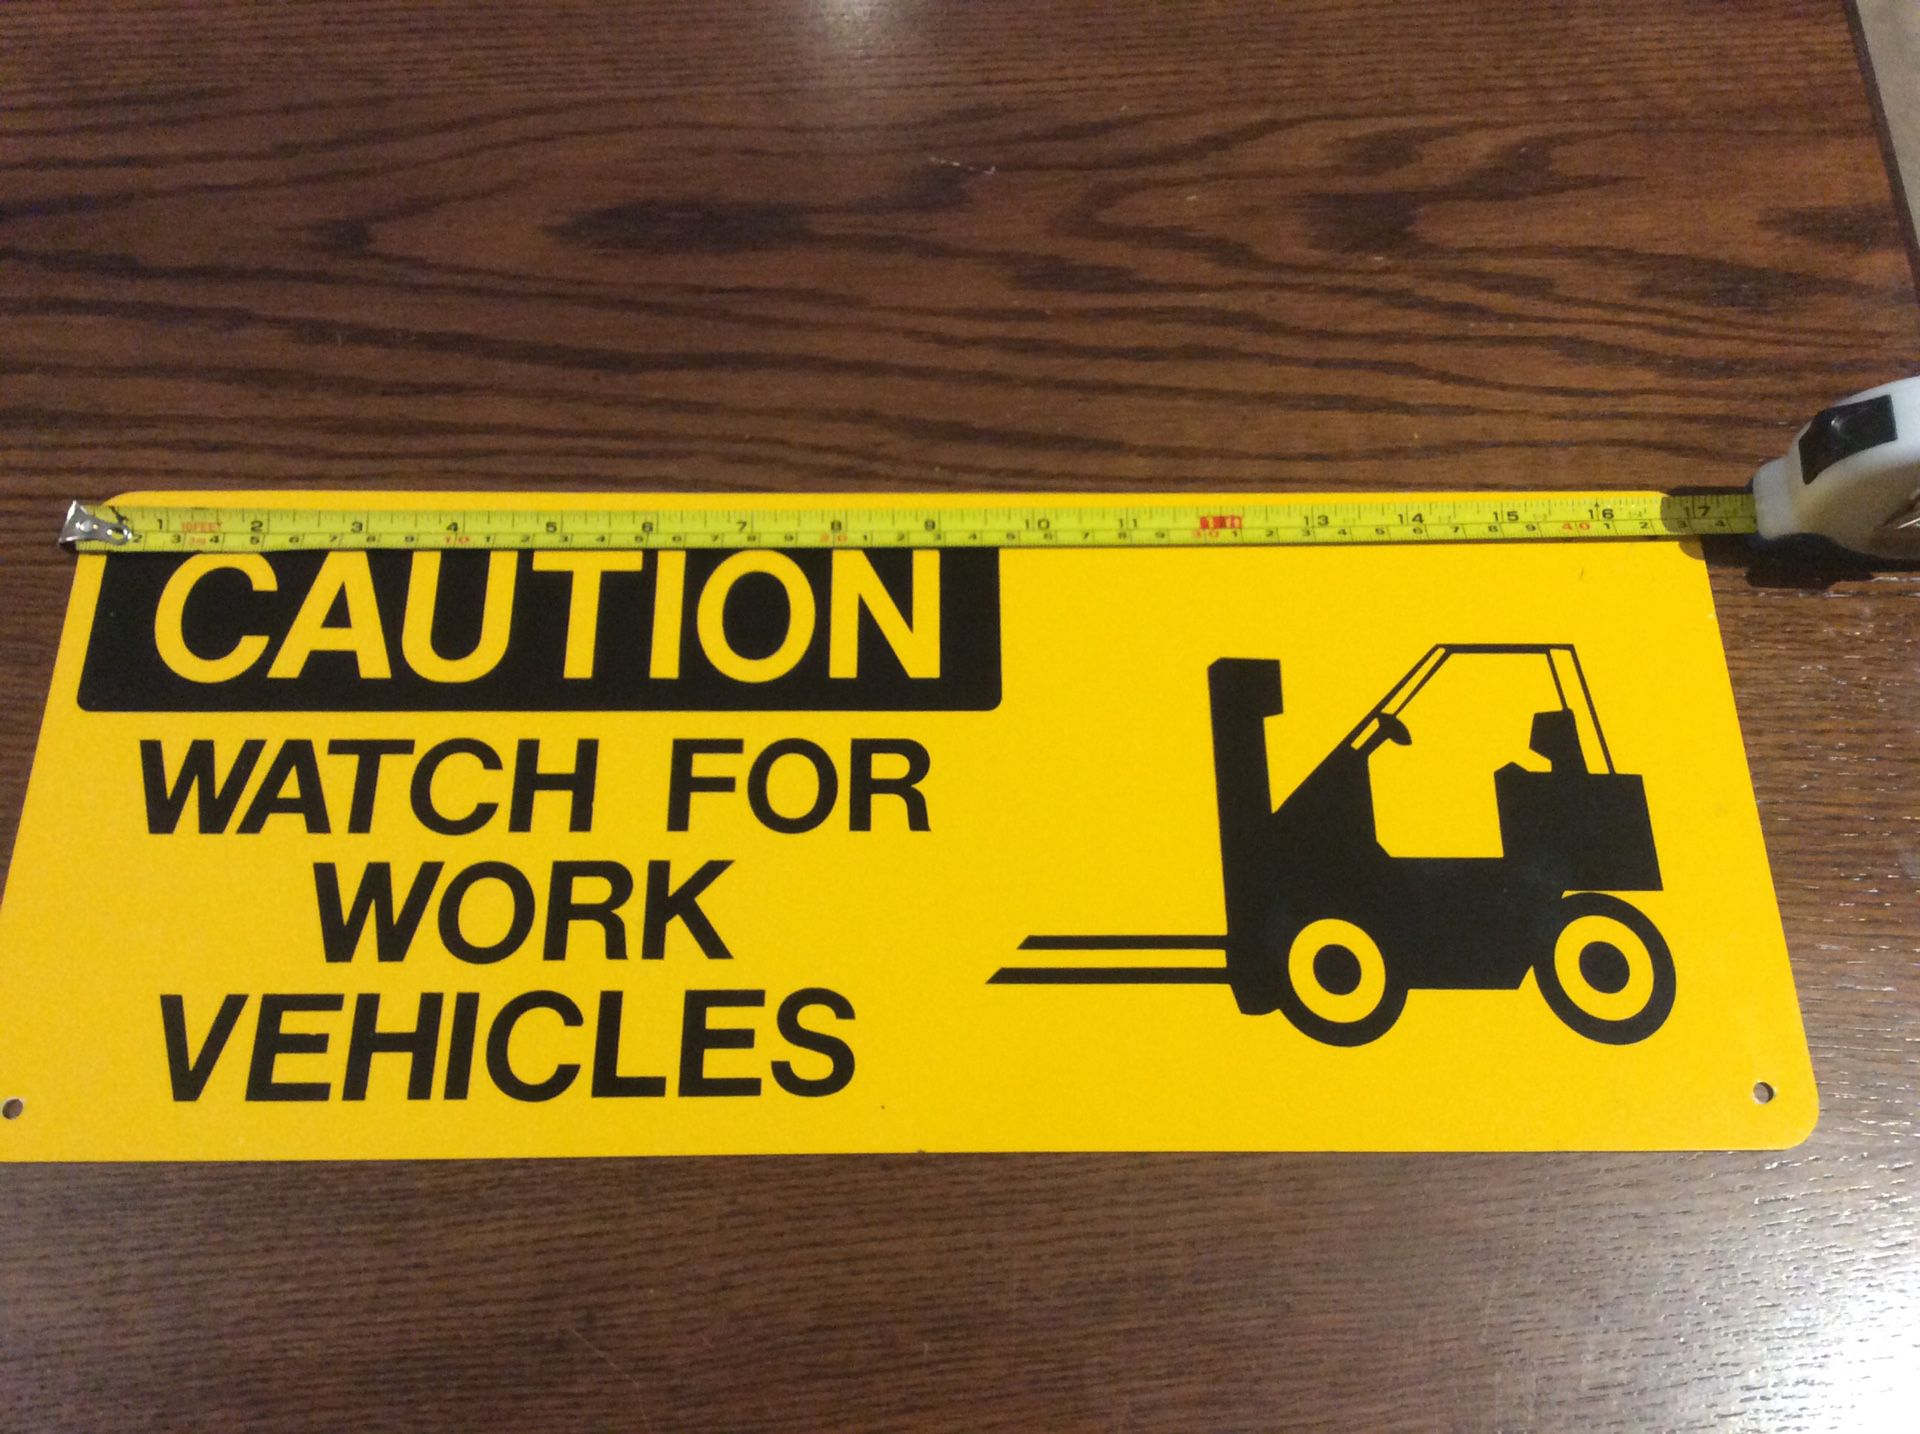 New caution all metal sign